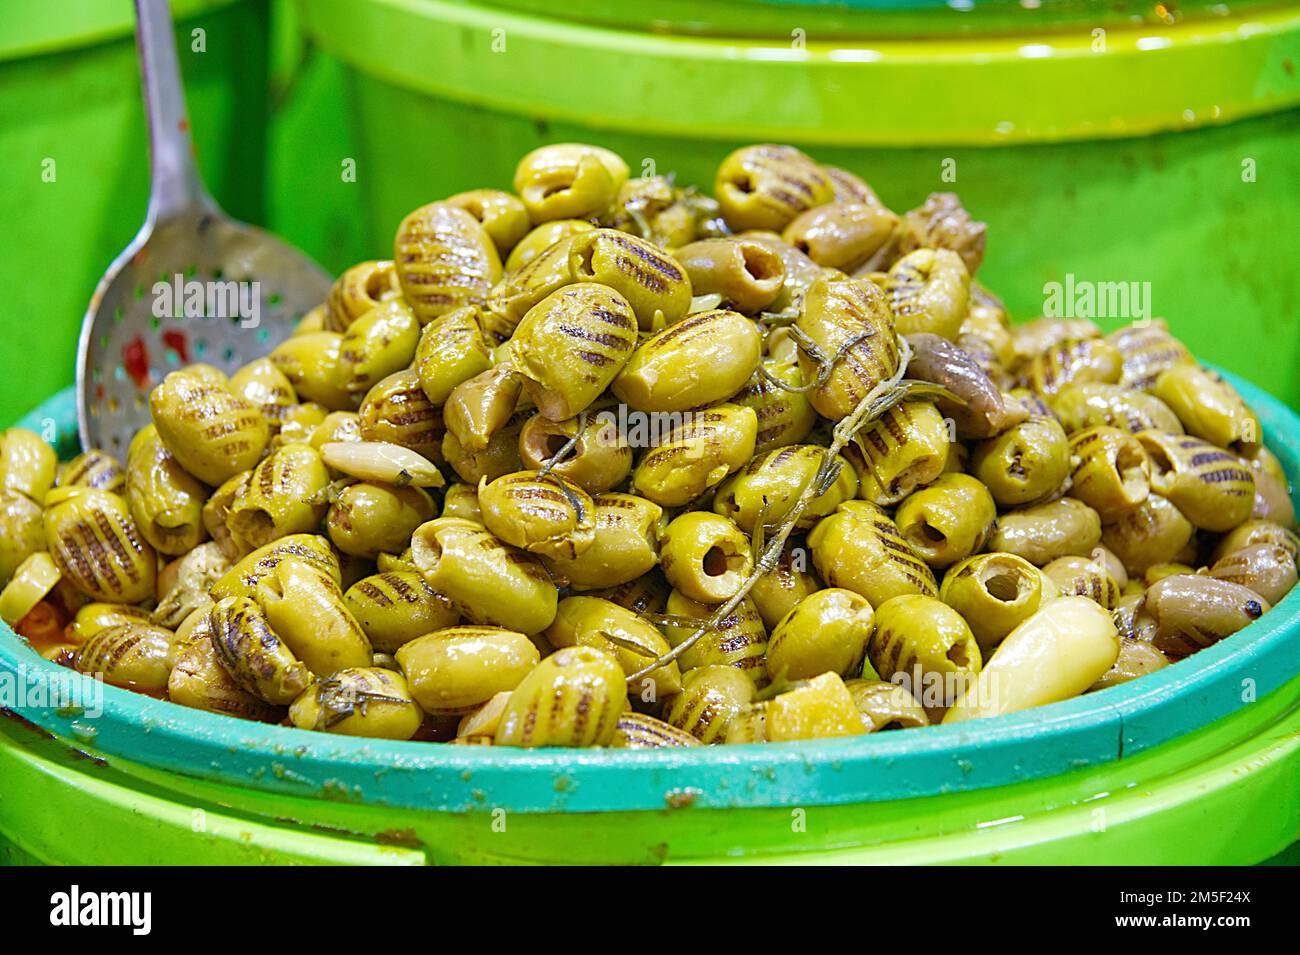 Green olives as local product to sell on the market counter Stock Photo